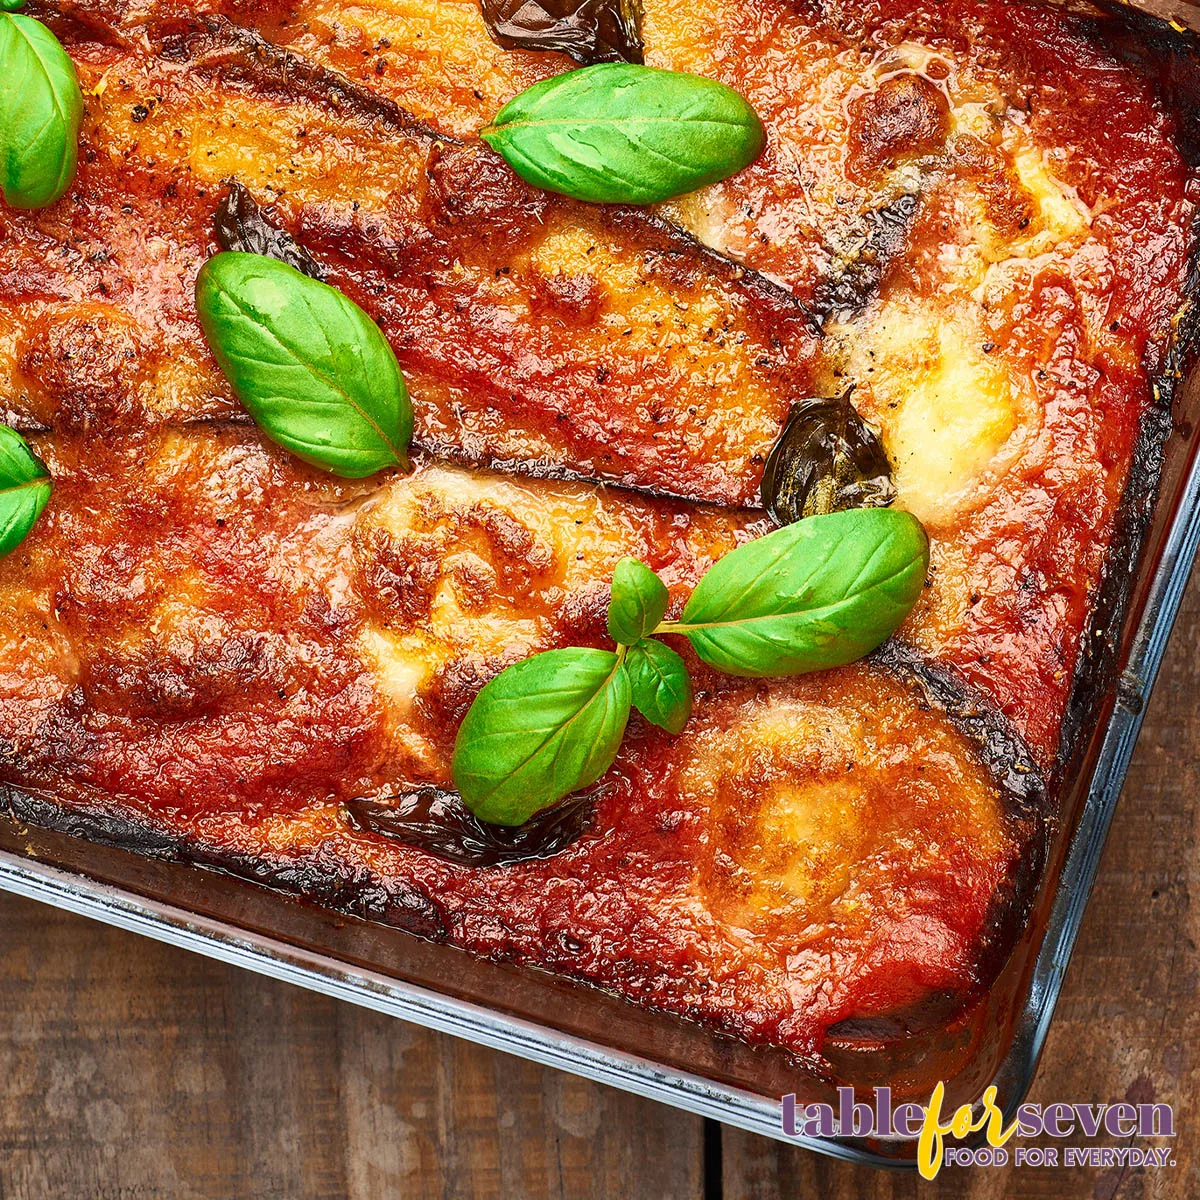 Eggplant Parmigiana fresh from the oven